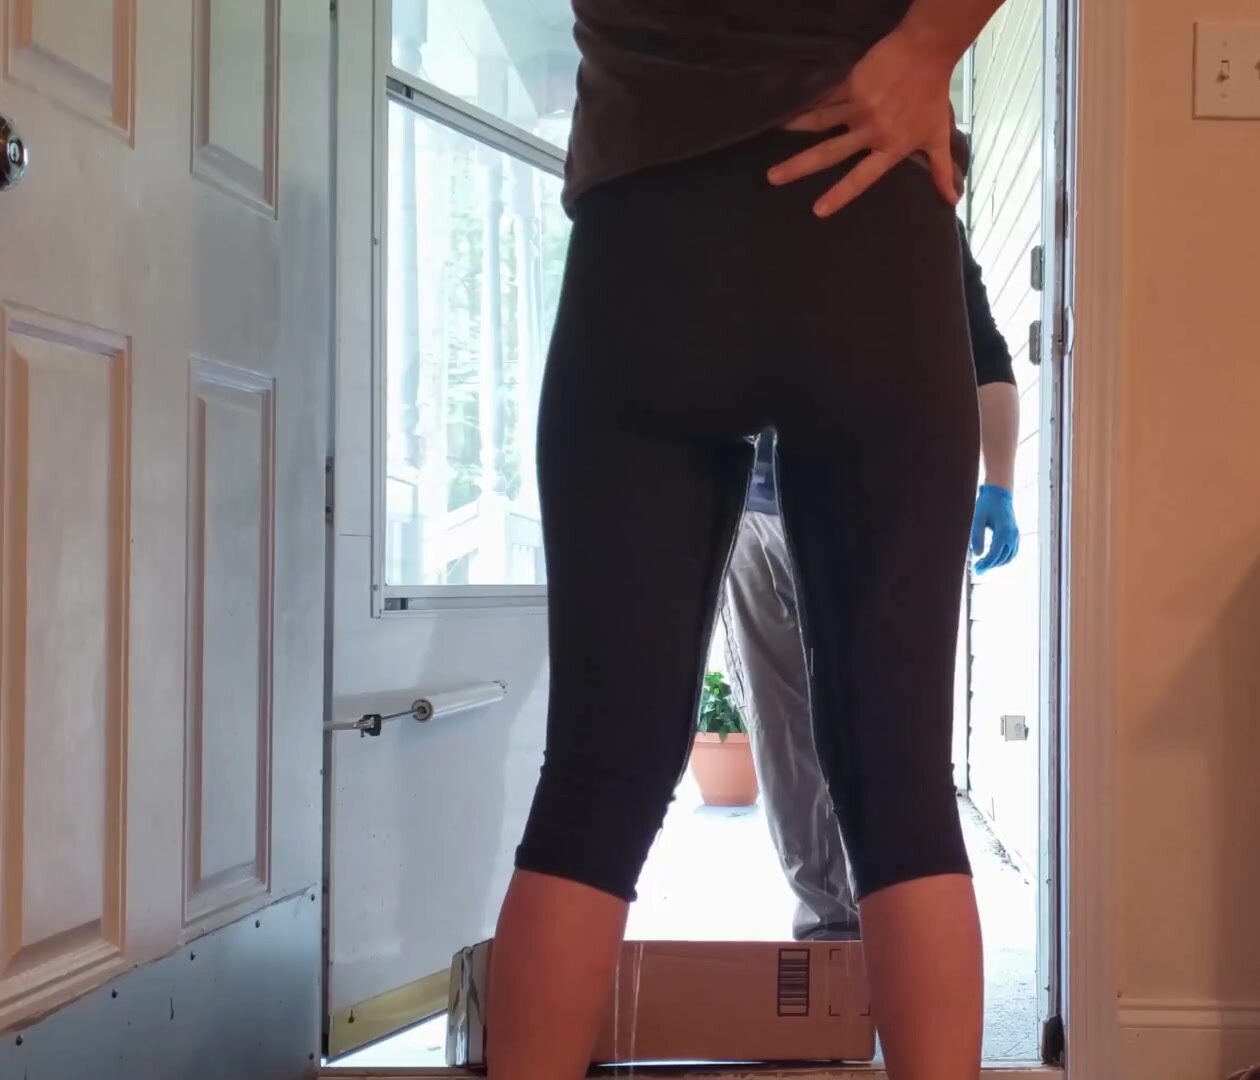 Pissing My Wife Wet her Leggings in Front of… ThisVid